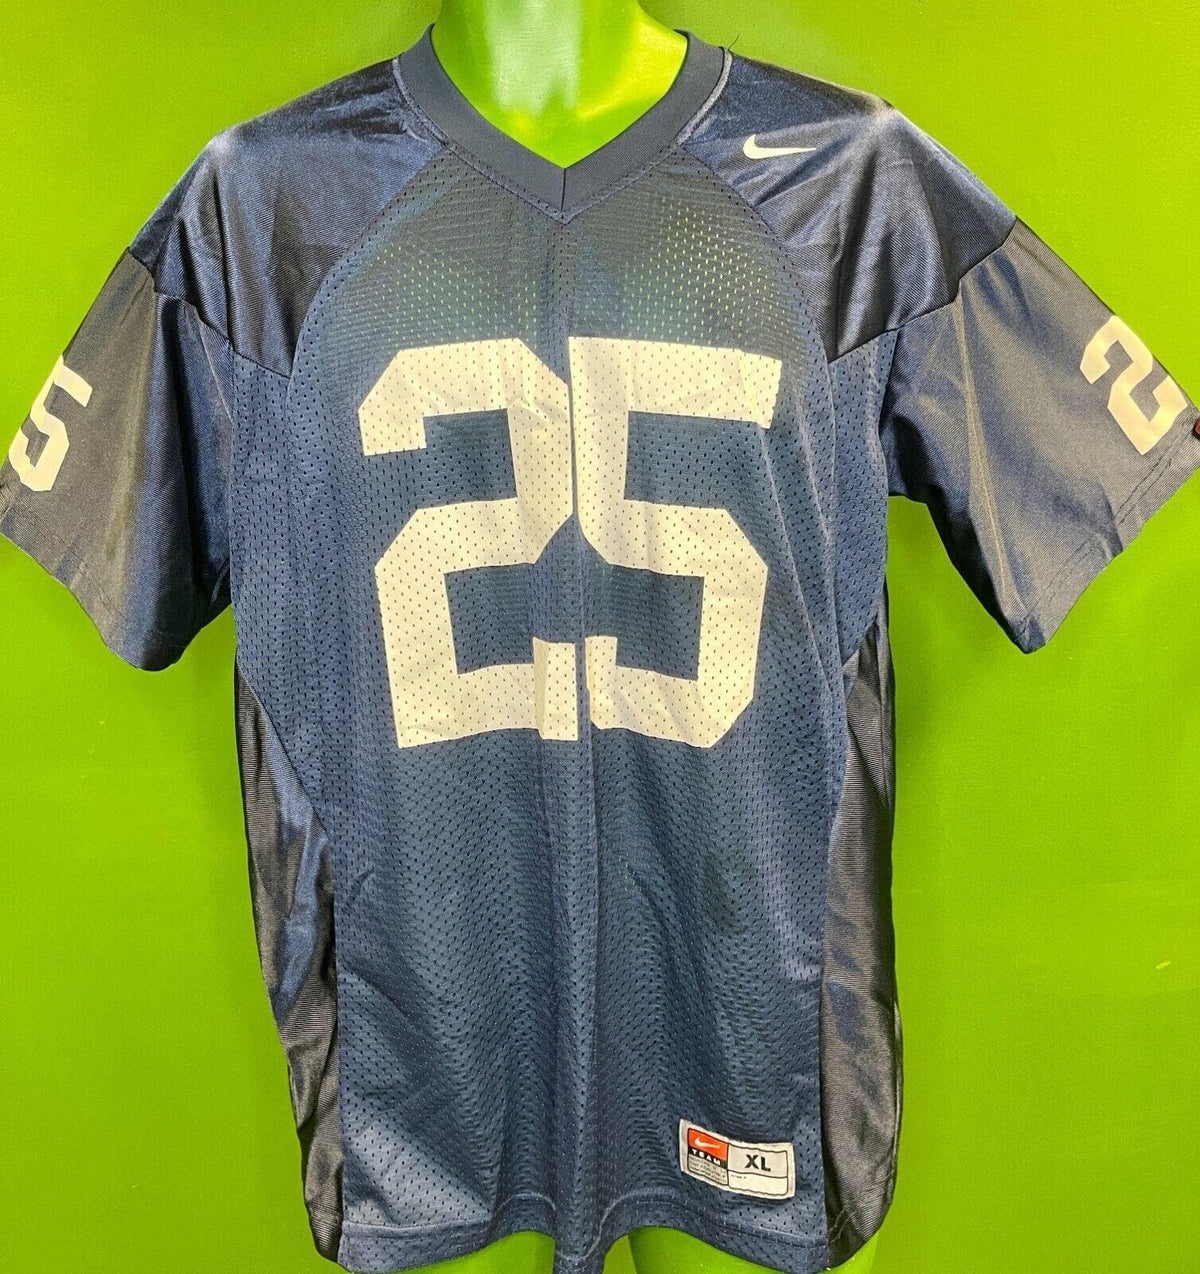 American Football Blue #25 Jersey Youth X-Large 18-20